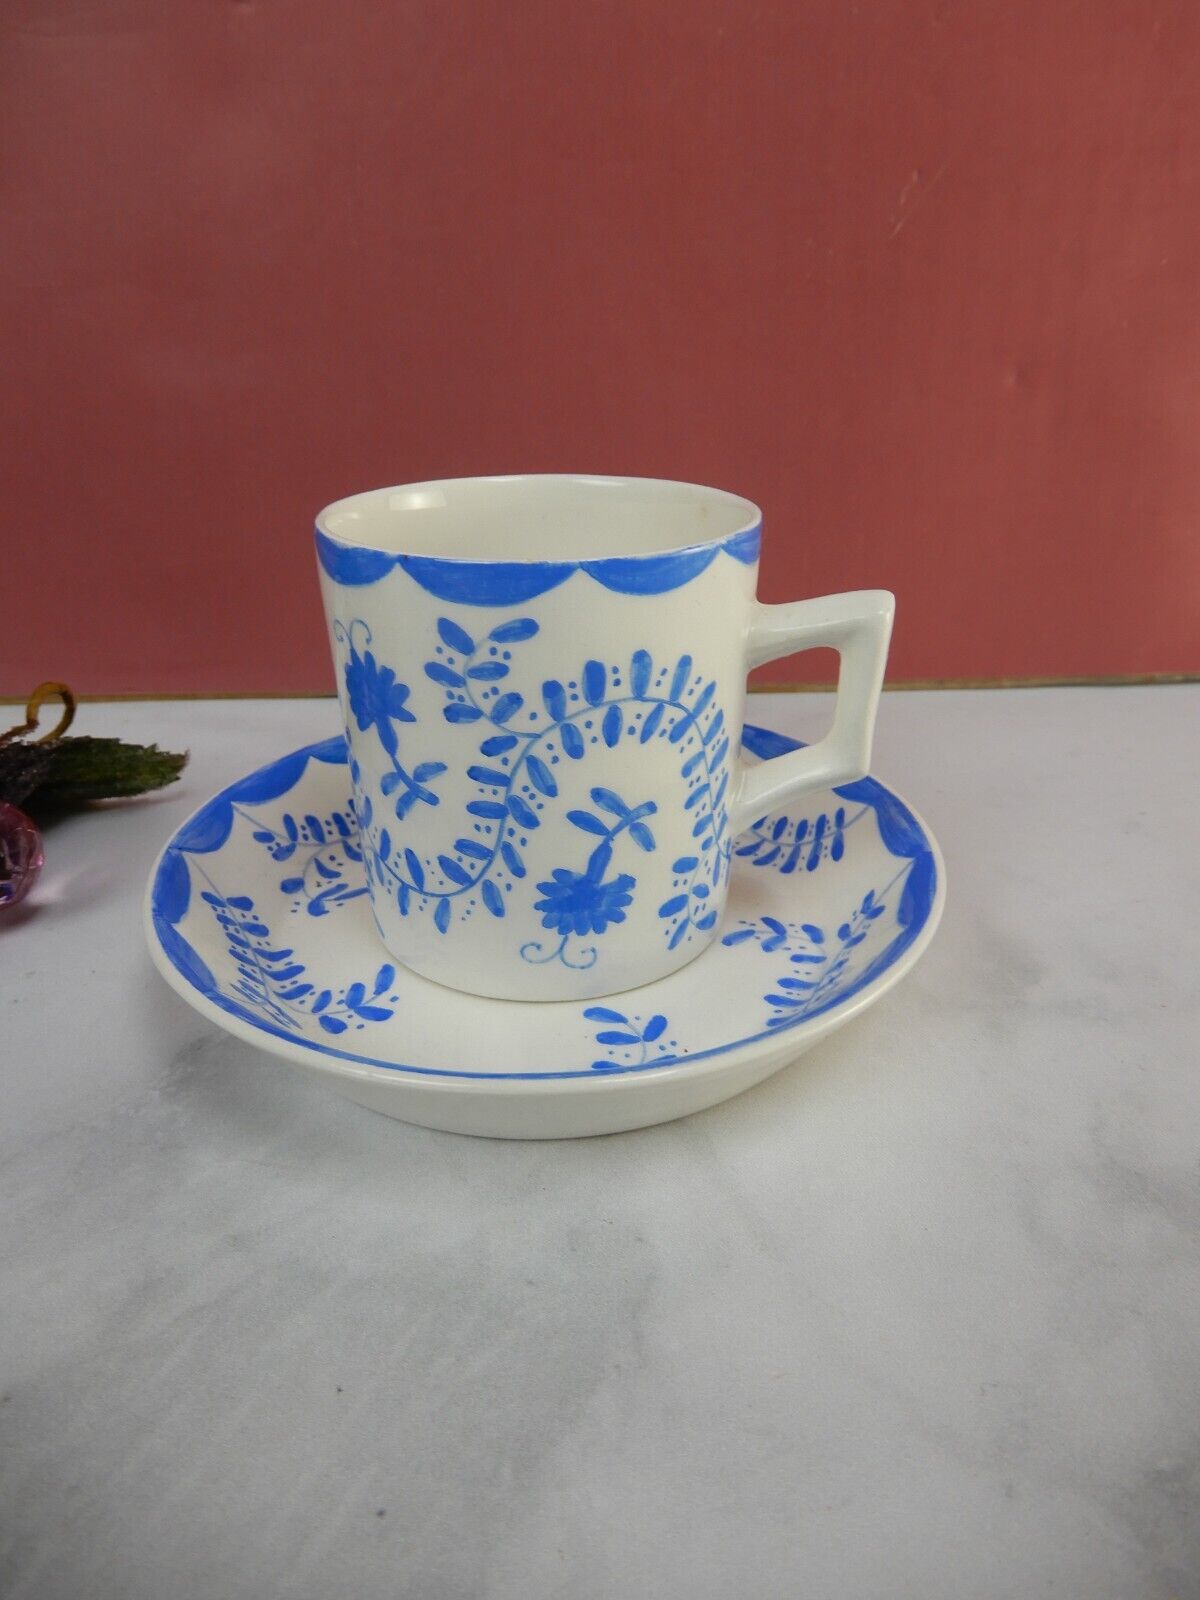 Vintage Bassanello Italy Demitasse Expresso Cup and Saucer